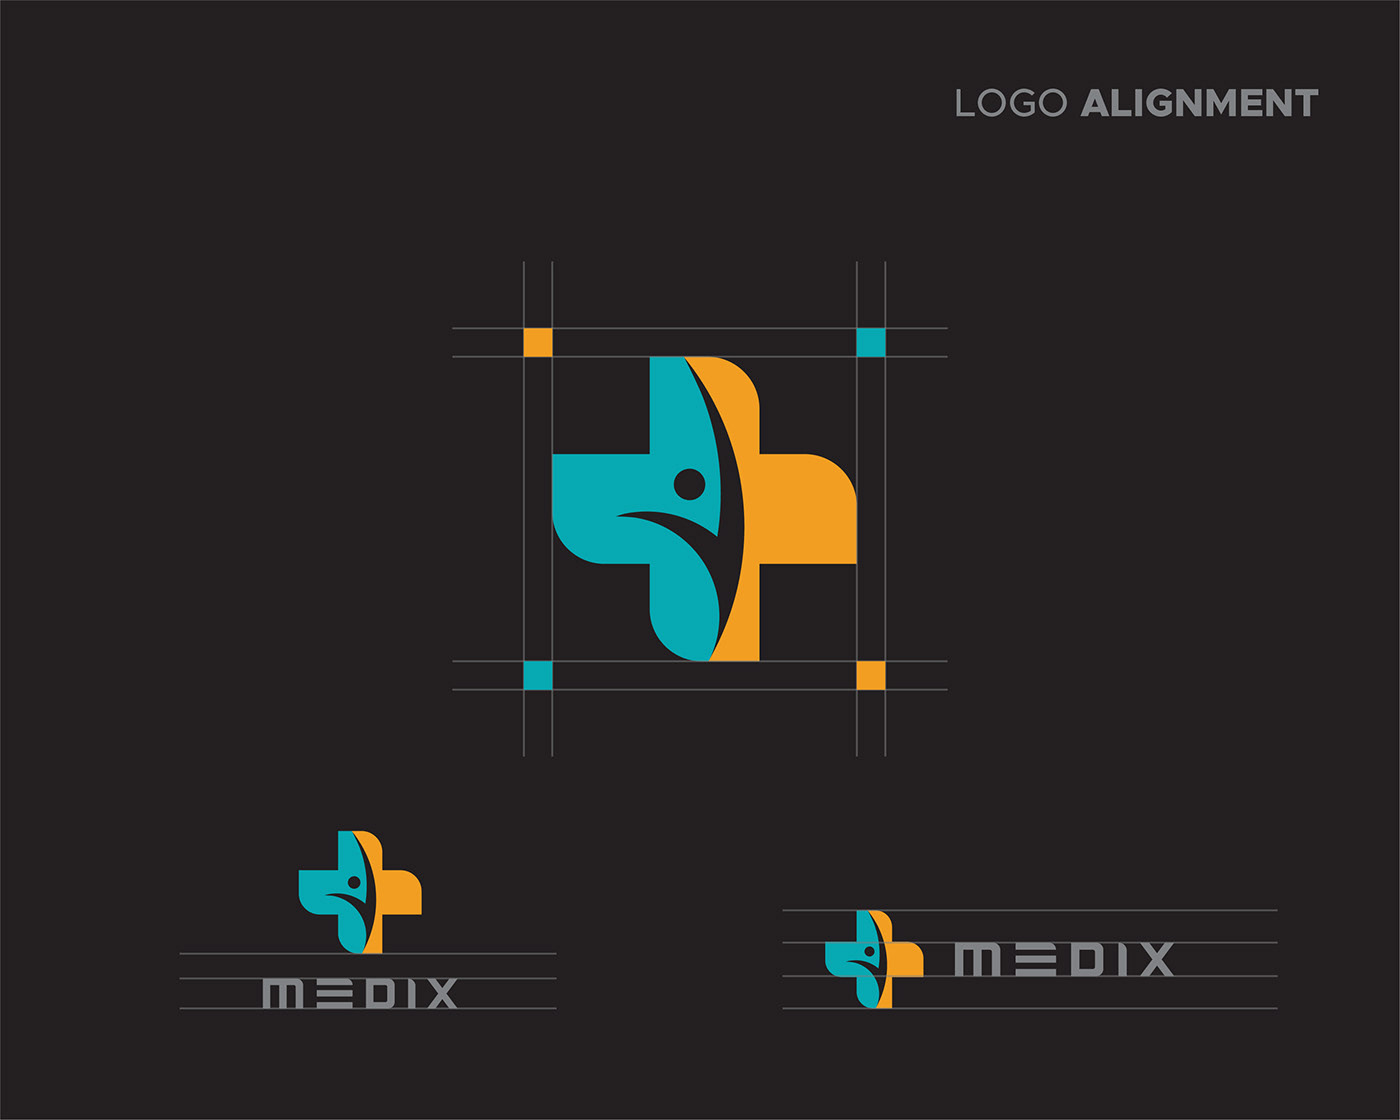 This is logo alignment, Perfect logo shape. This is a medical logo design included plus sign.